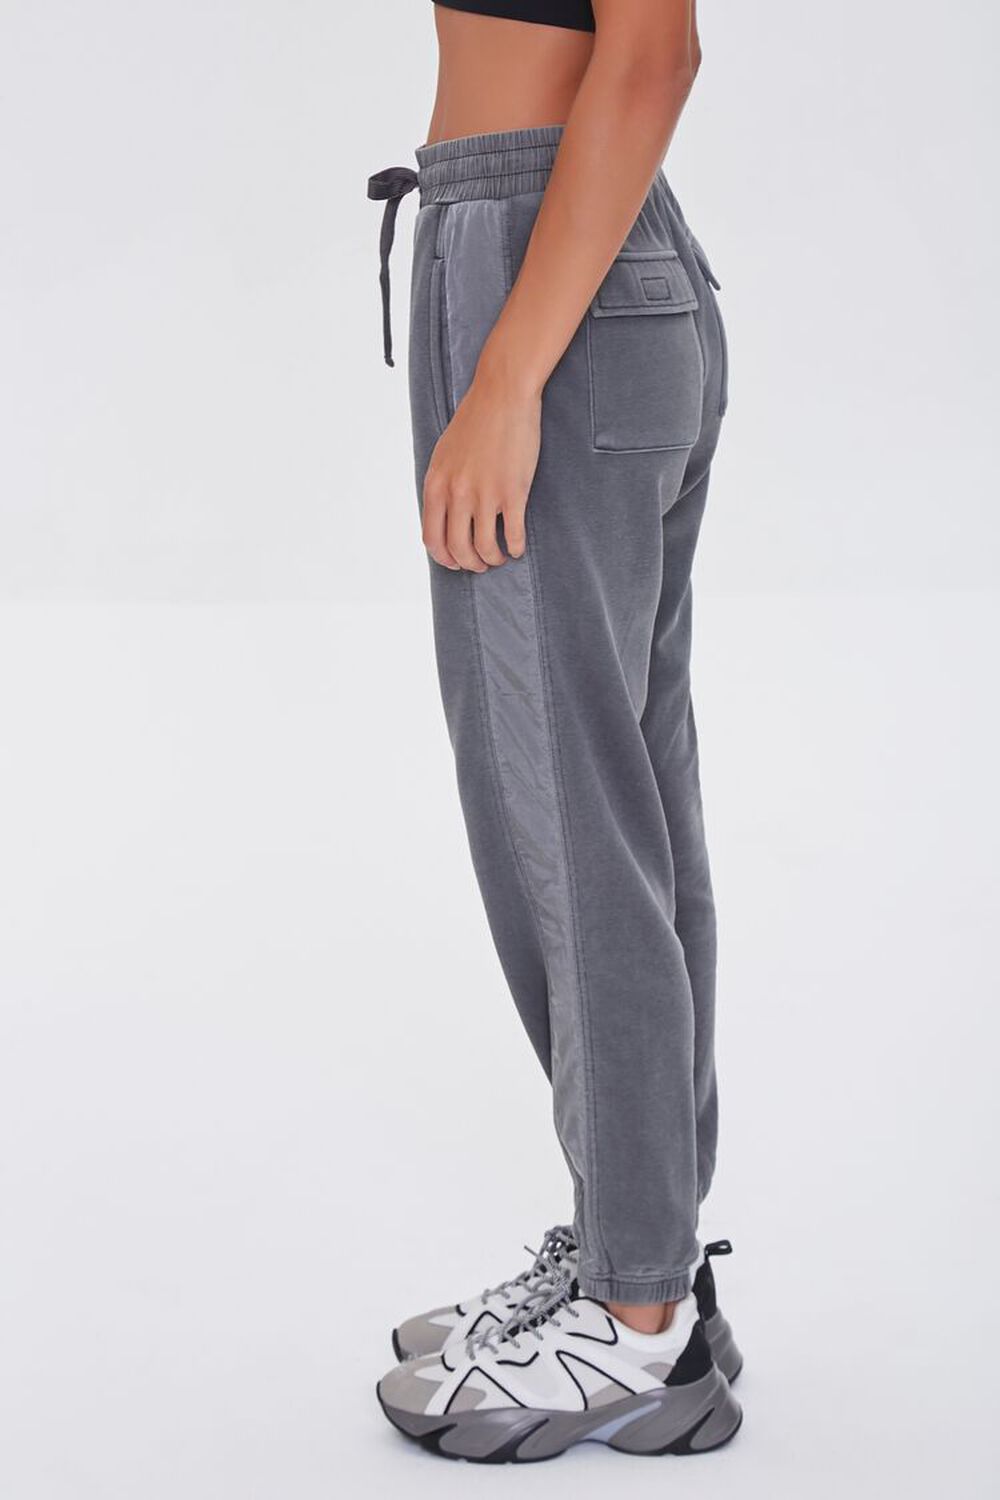 CHARCOAL Side-Striped Joggers, image 3